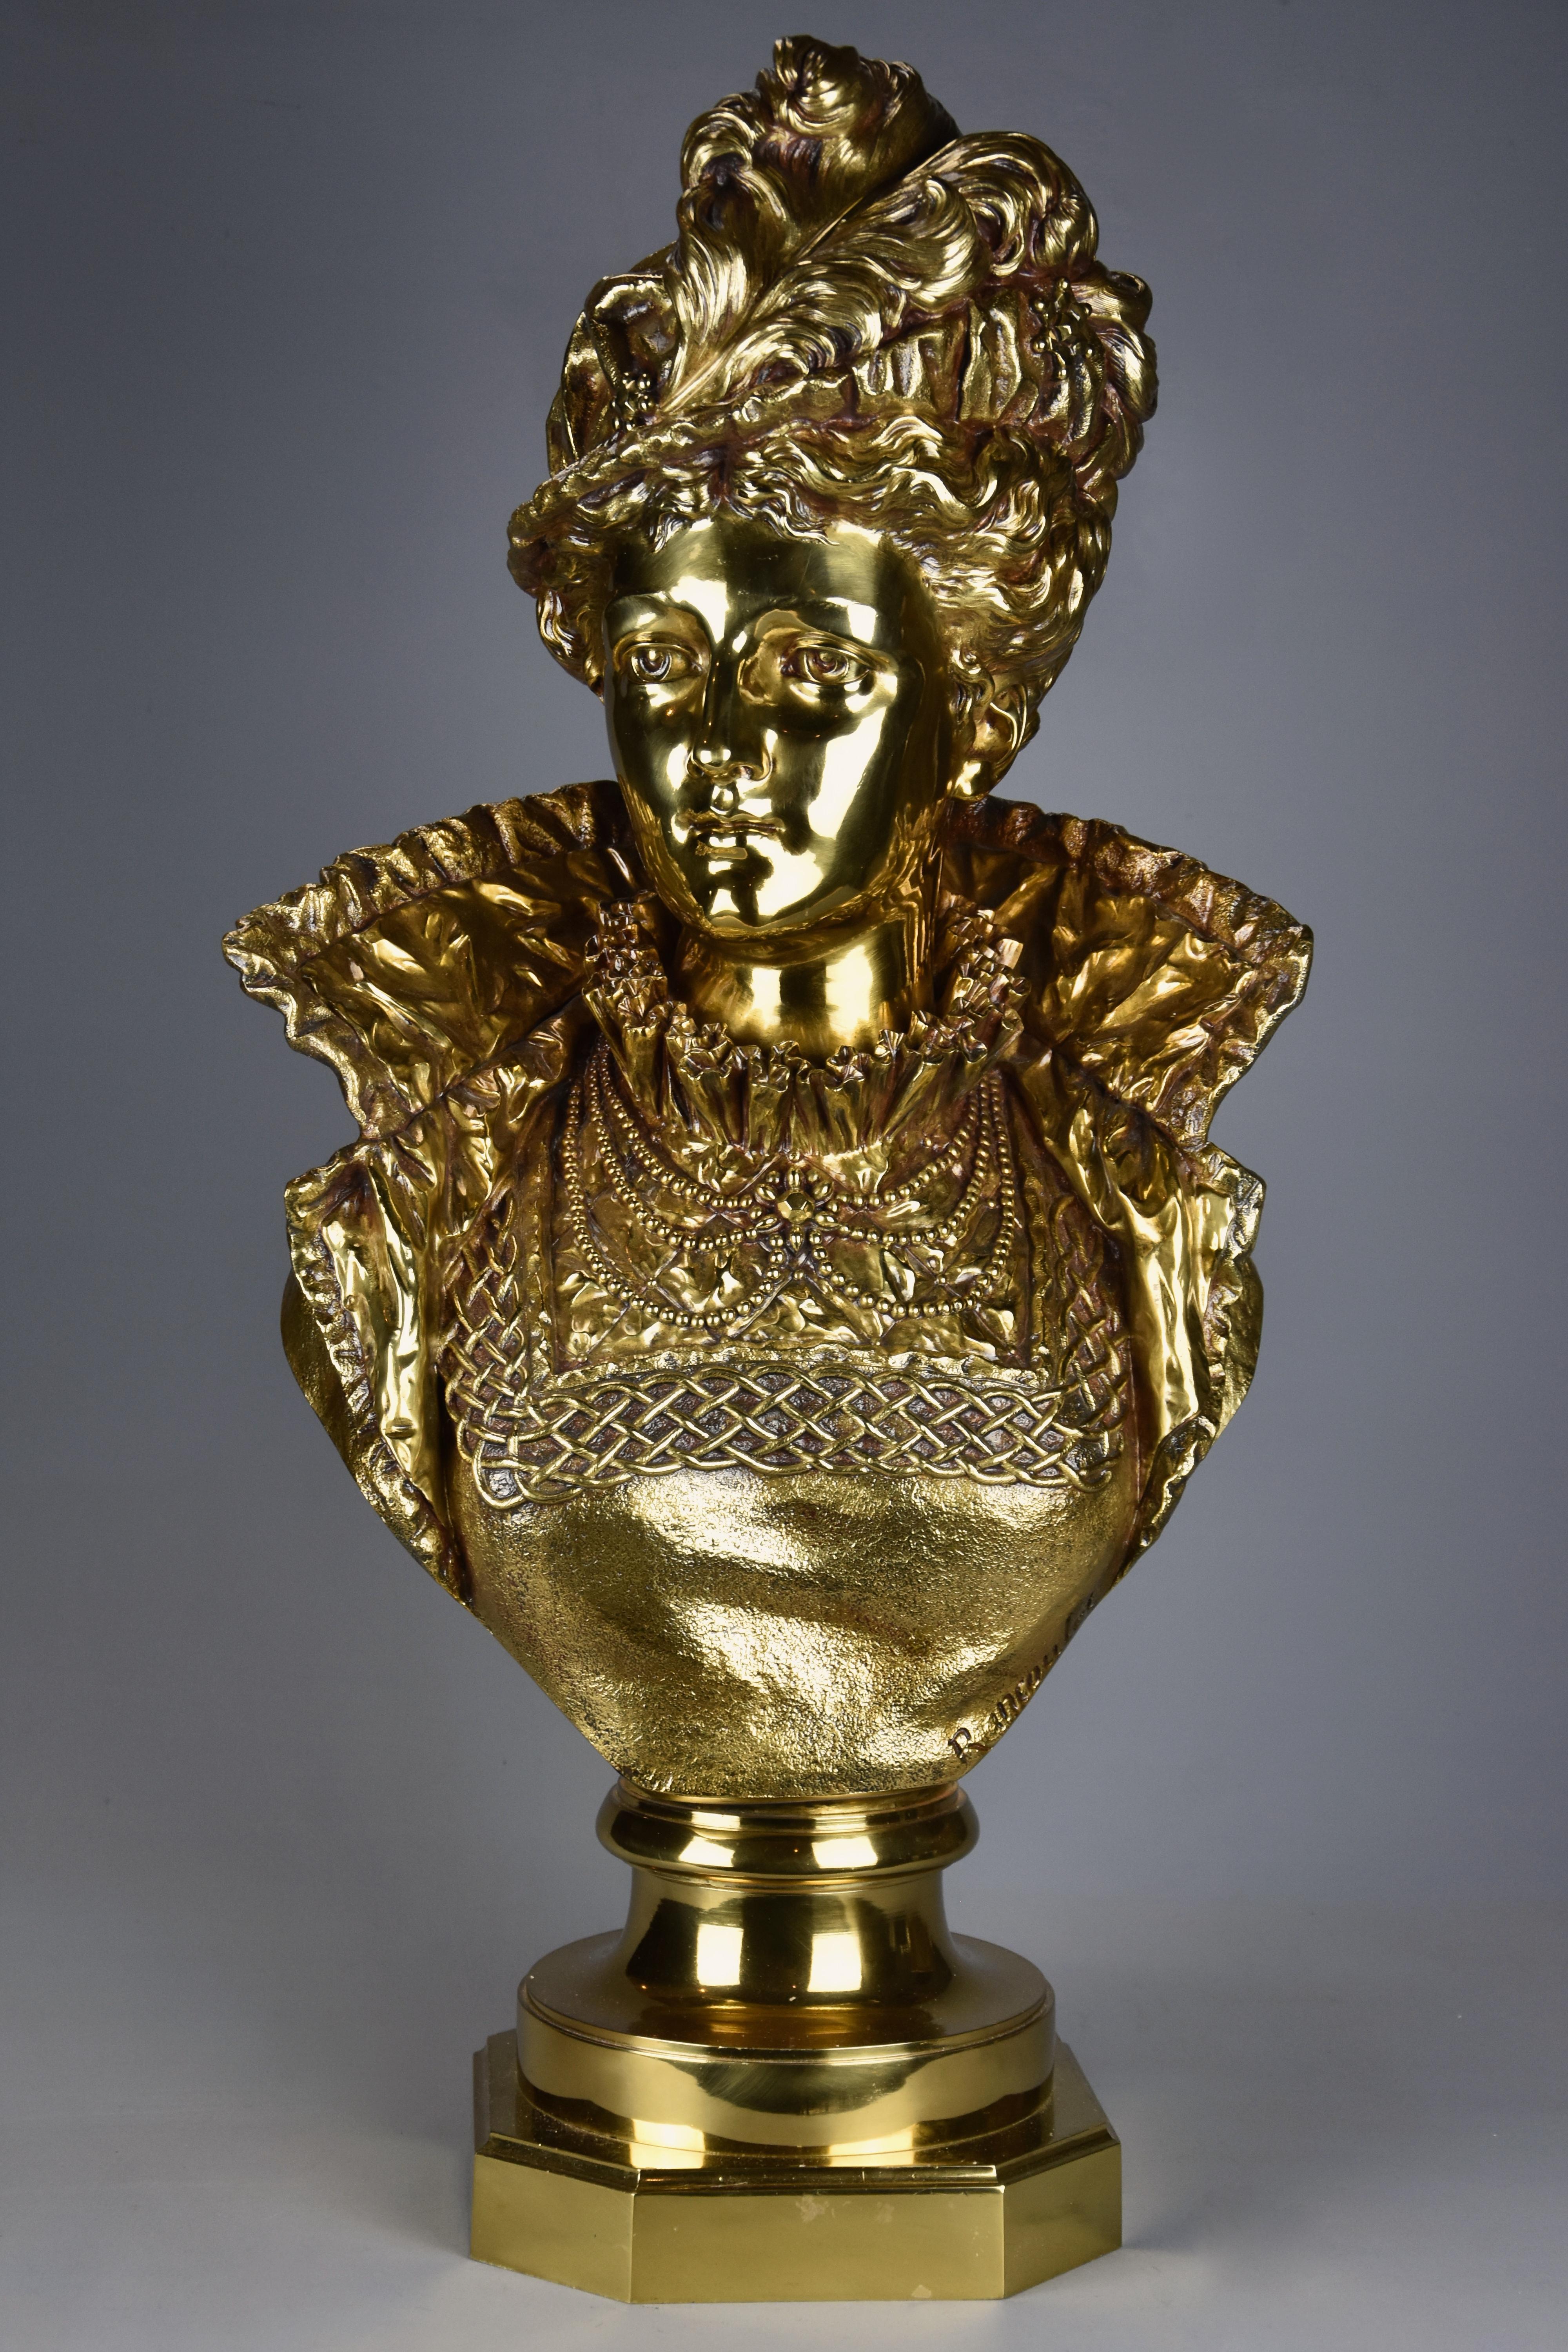 A late 19th century French gilt bronze bust figure of a Renaissance lady by Ernest Rancoulet (1870-1915).

This highly decorative bust depicts a finely dressed Renaissance lady with a plumed hat, high collar with bead and lace work supported on a